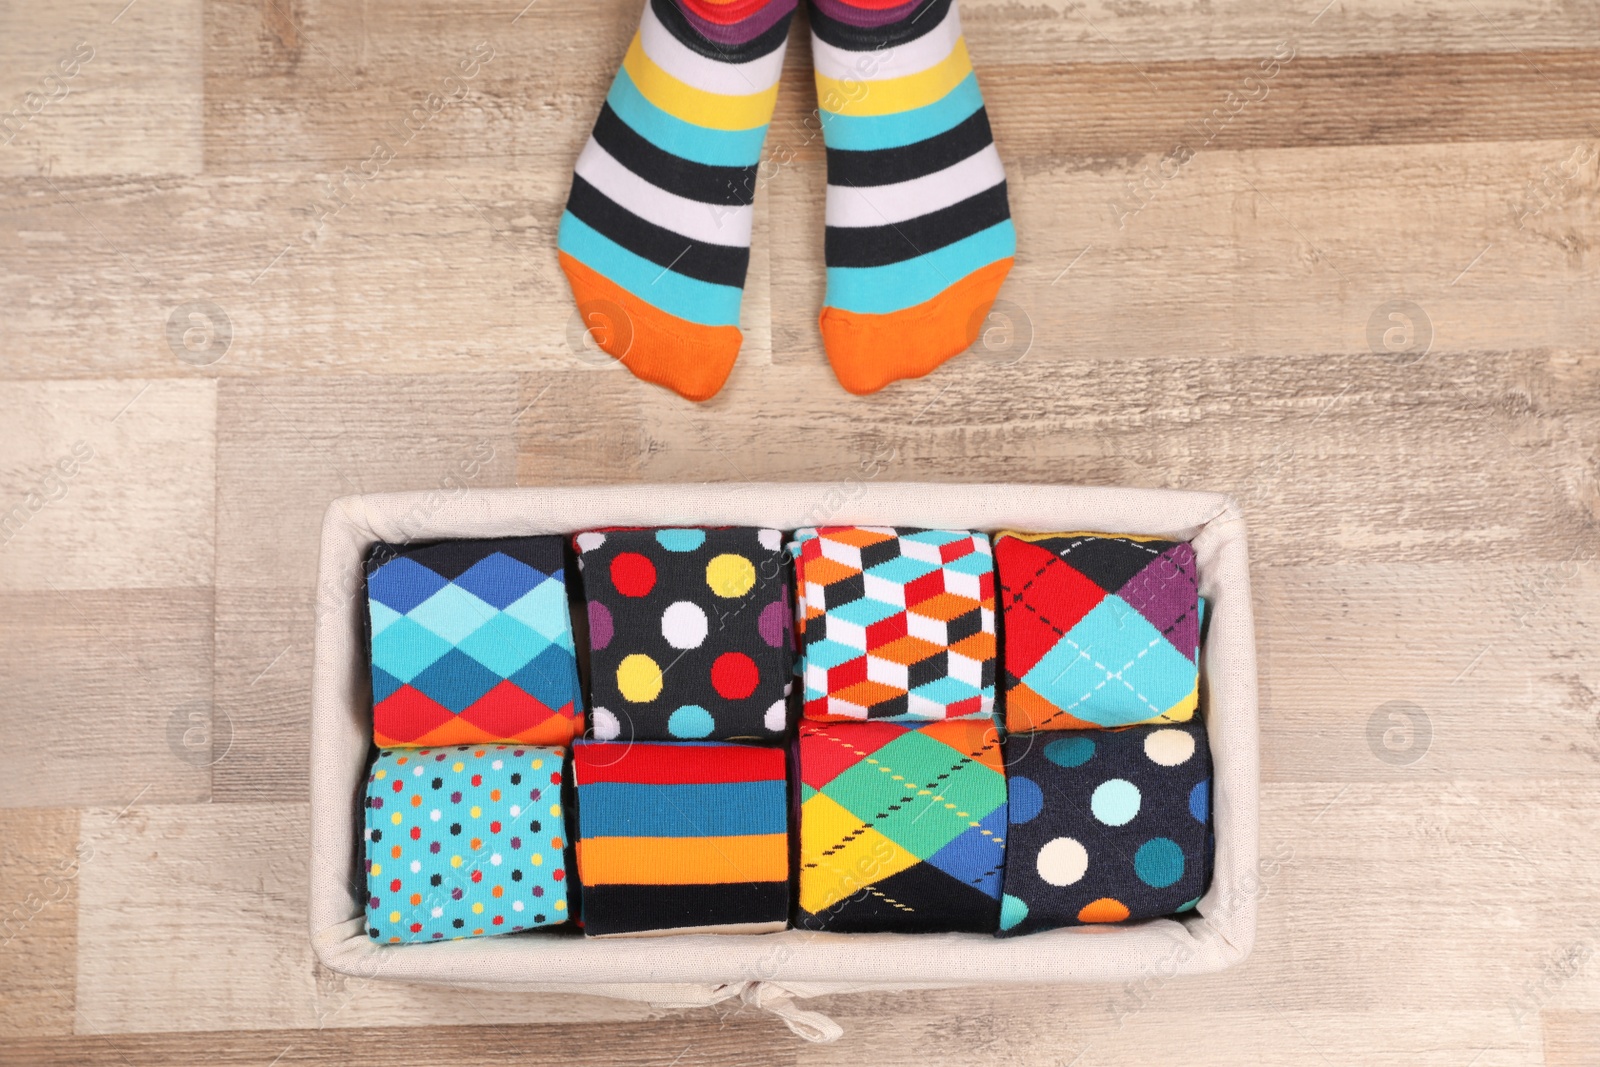 Photo of Woman with different socks standing on floor, top view